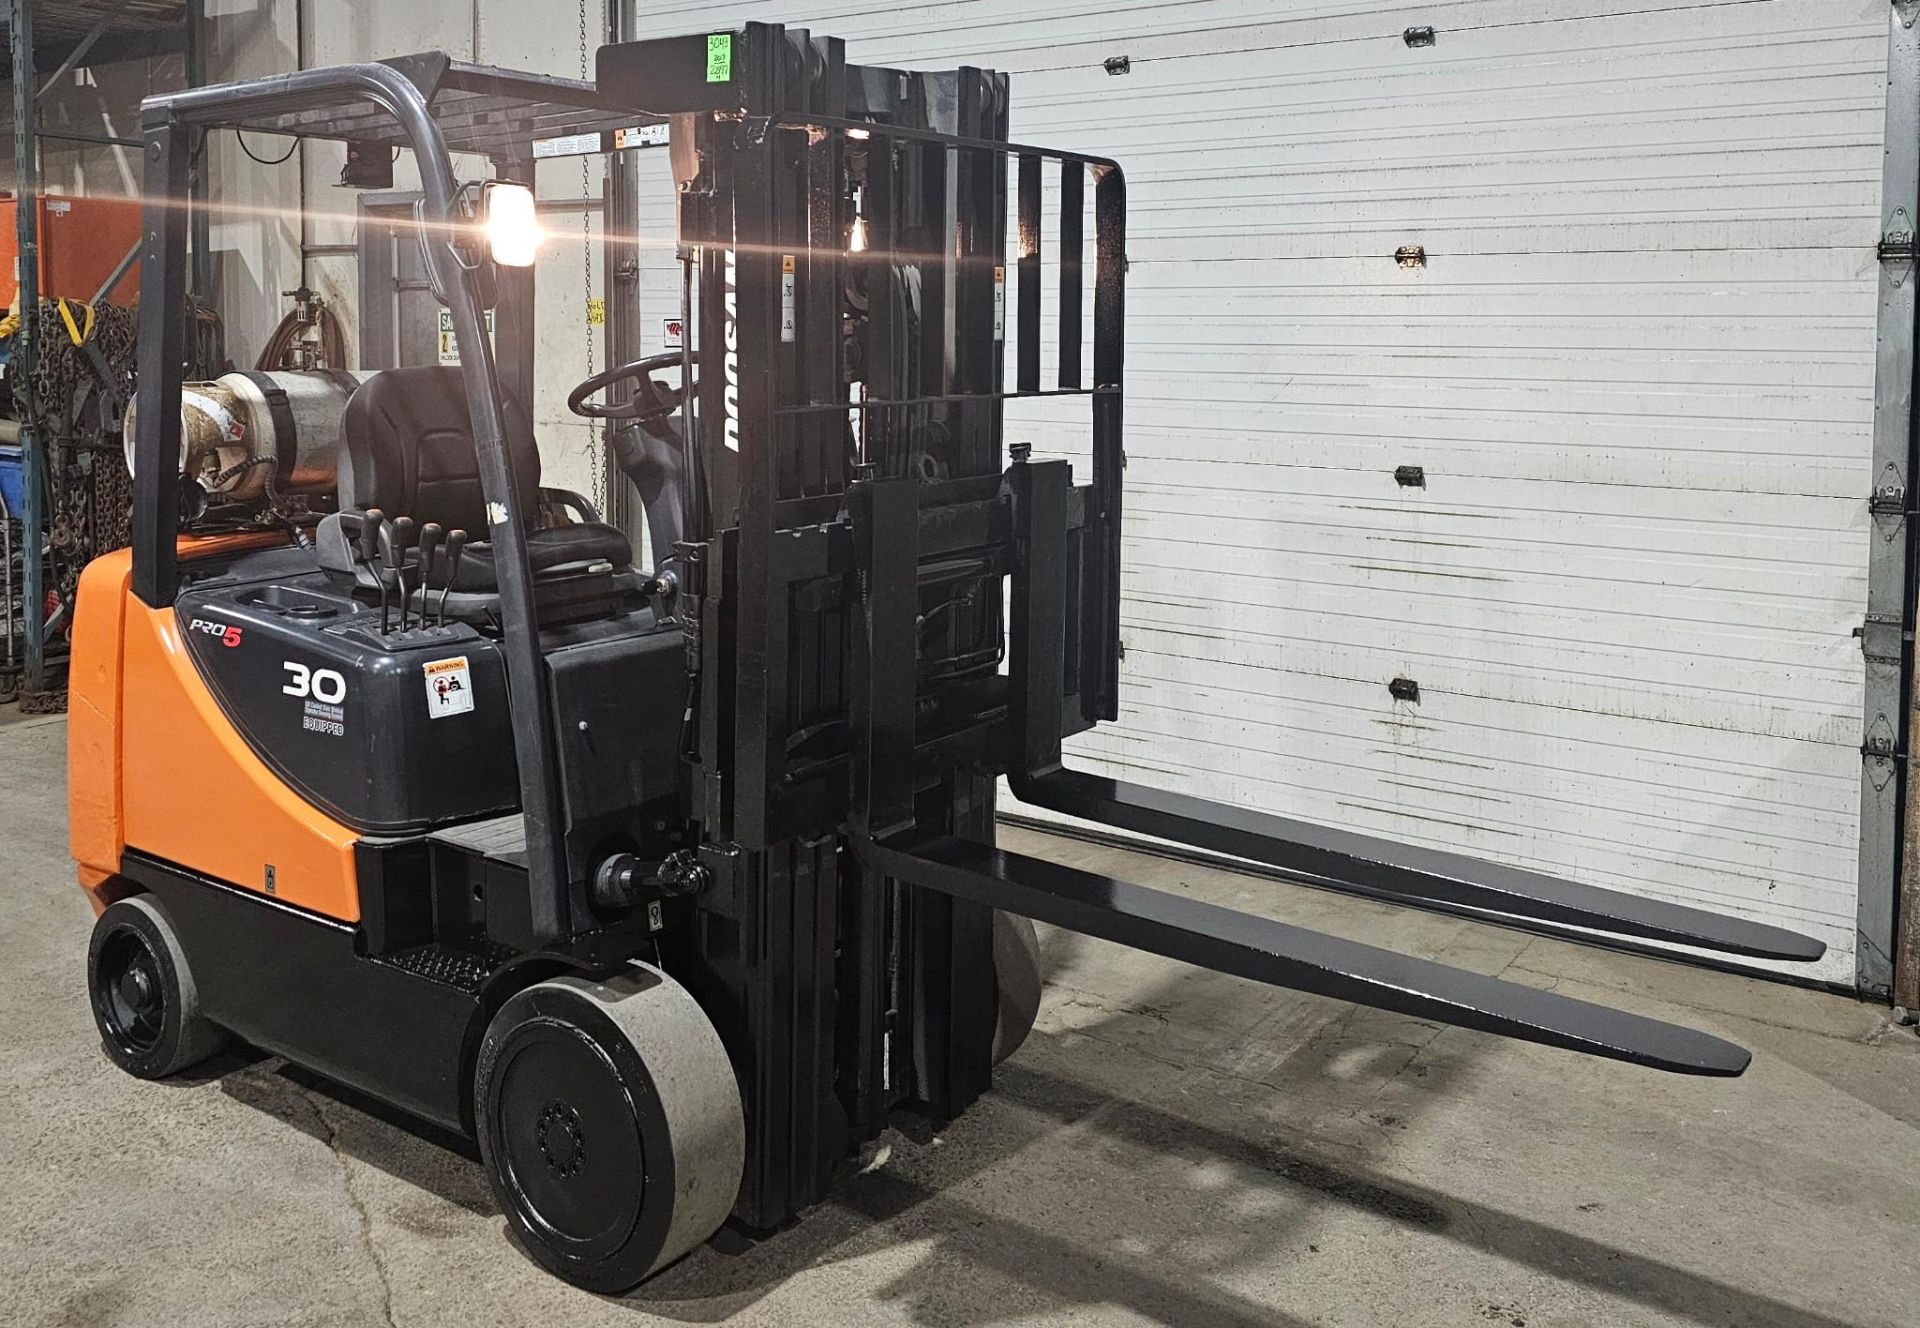 2017 DOOSAN 6,000lbs Capacity LPG (Propane) Forklift with sideshift & 3-STAGE MAST 189" load - Image 7 of 9